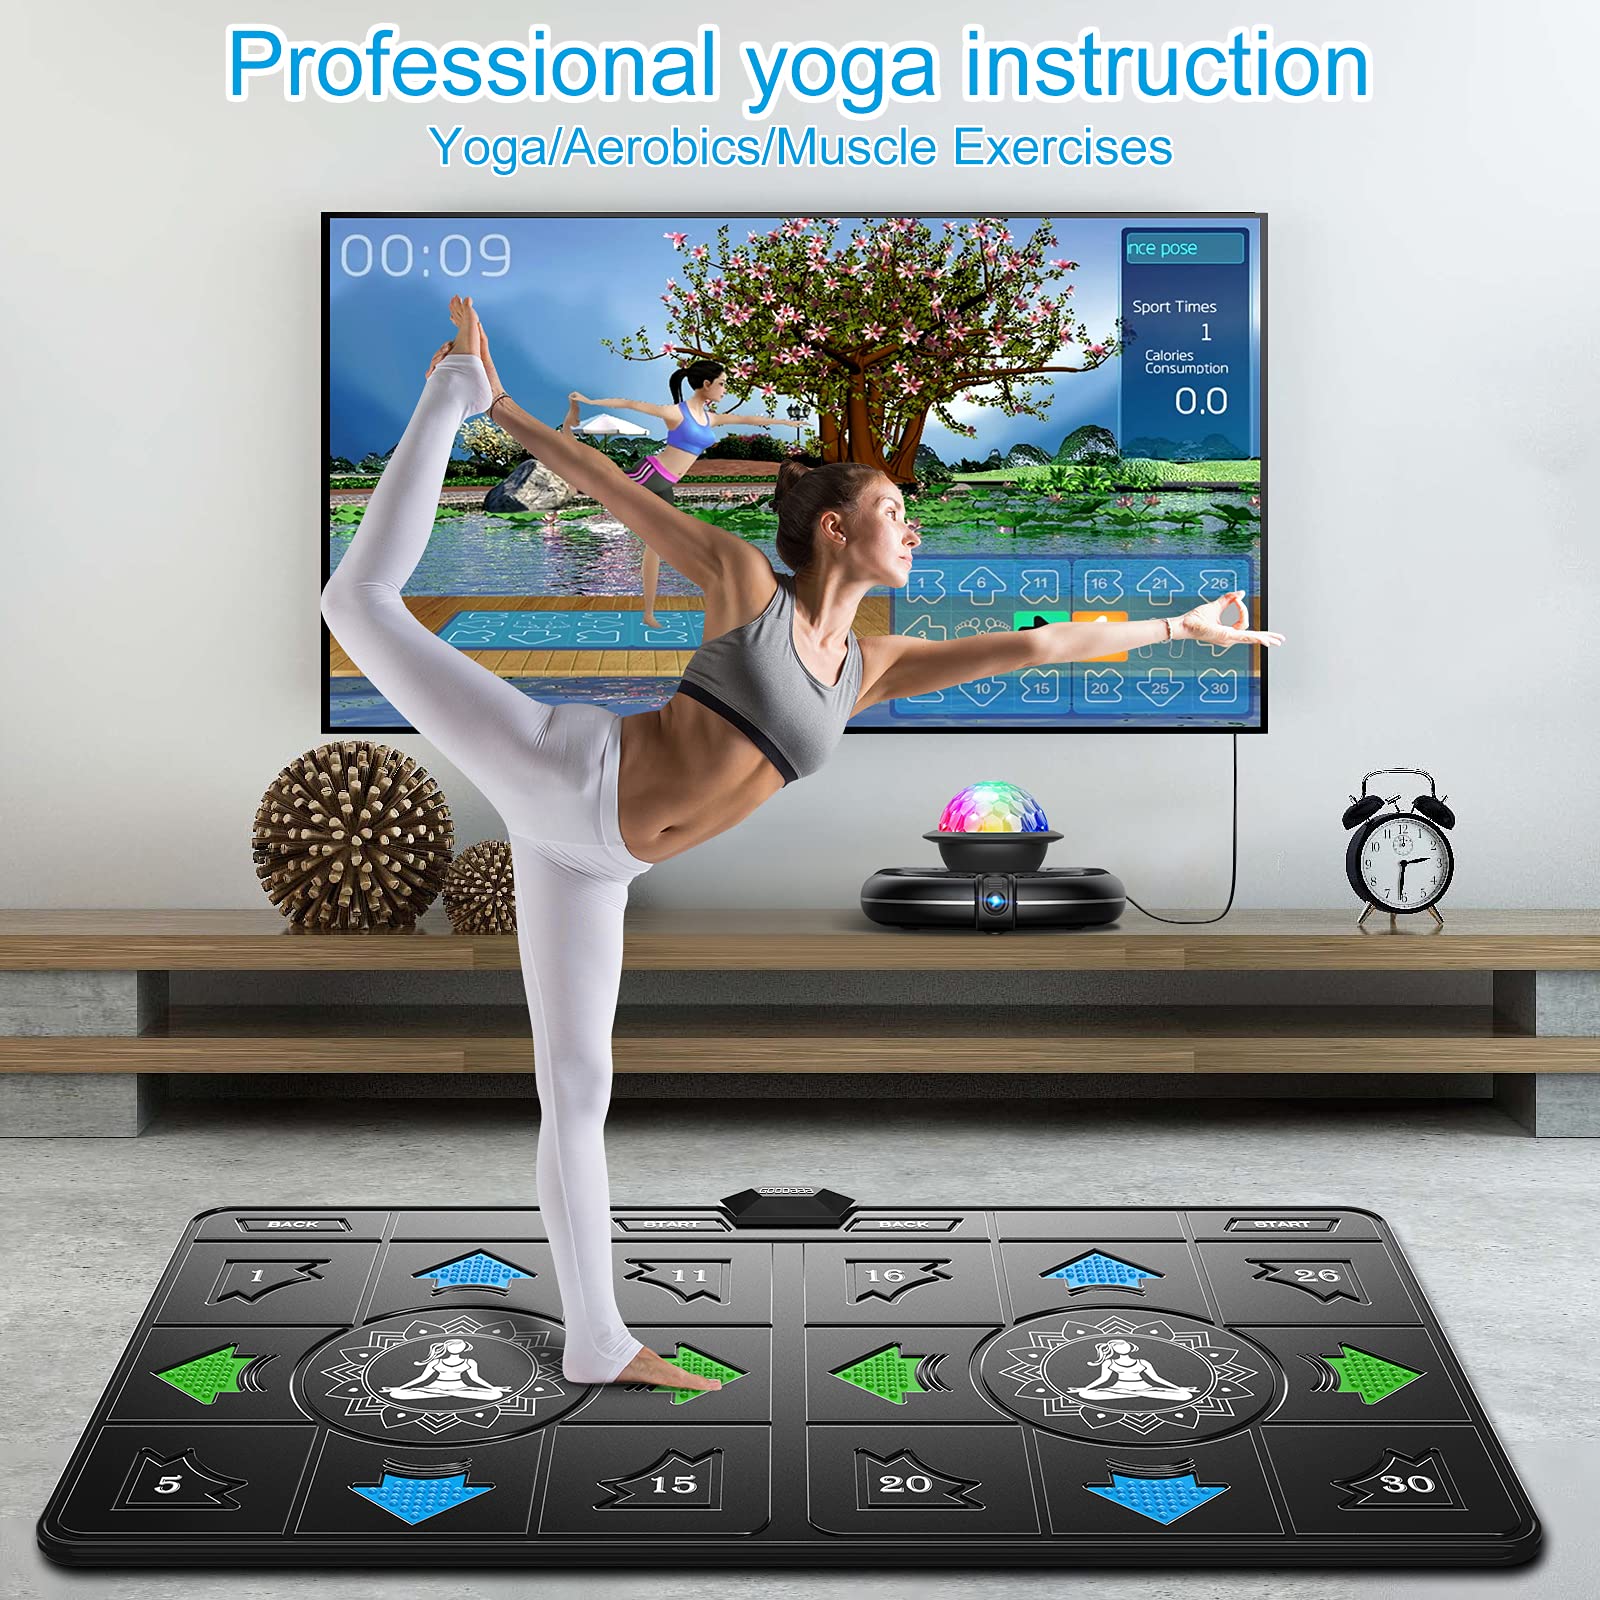 MetFut Dance Mat for Kids and Adults,Musical Electronic Dancing mat, Double User Yoga Dance Floor with Wireless Handle, HD Camera Game Multi-Function Host, Non-Slip Dance Pad